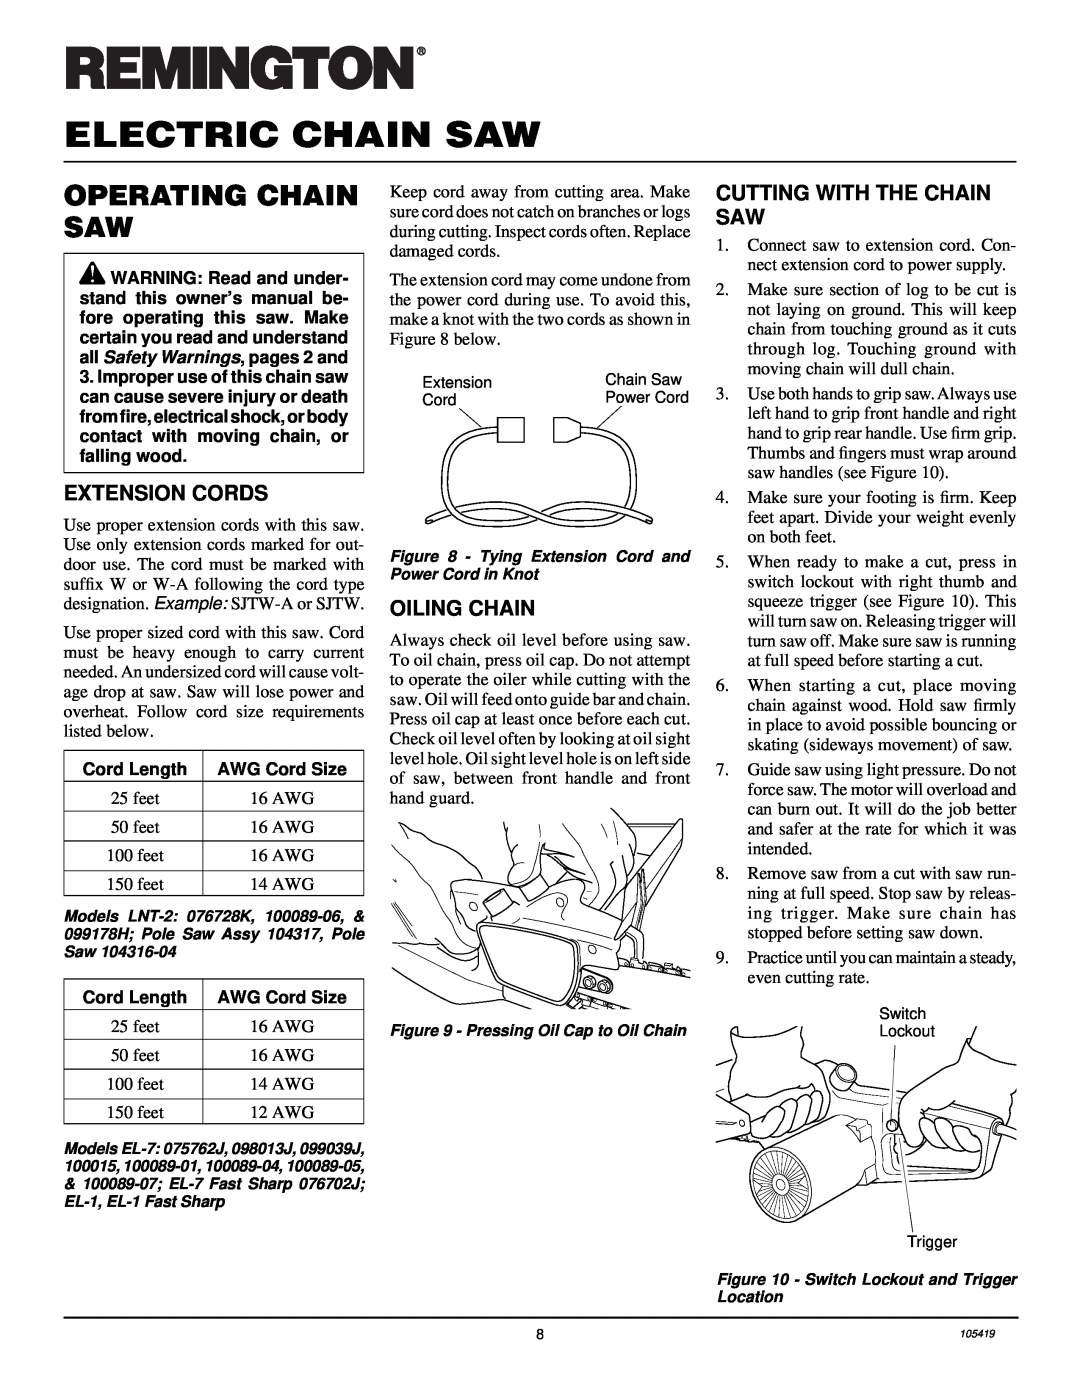 Desa 076702J, 100089-01 Operating Chain Saw, Extension Cords, Oiling Chain, Cutting With The Chain Saw, Electric Chain Saw 